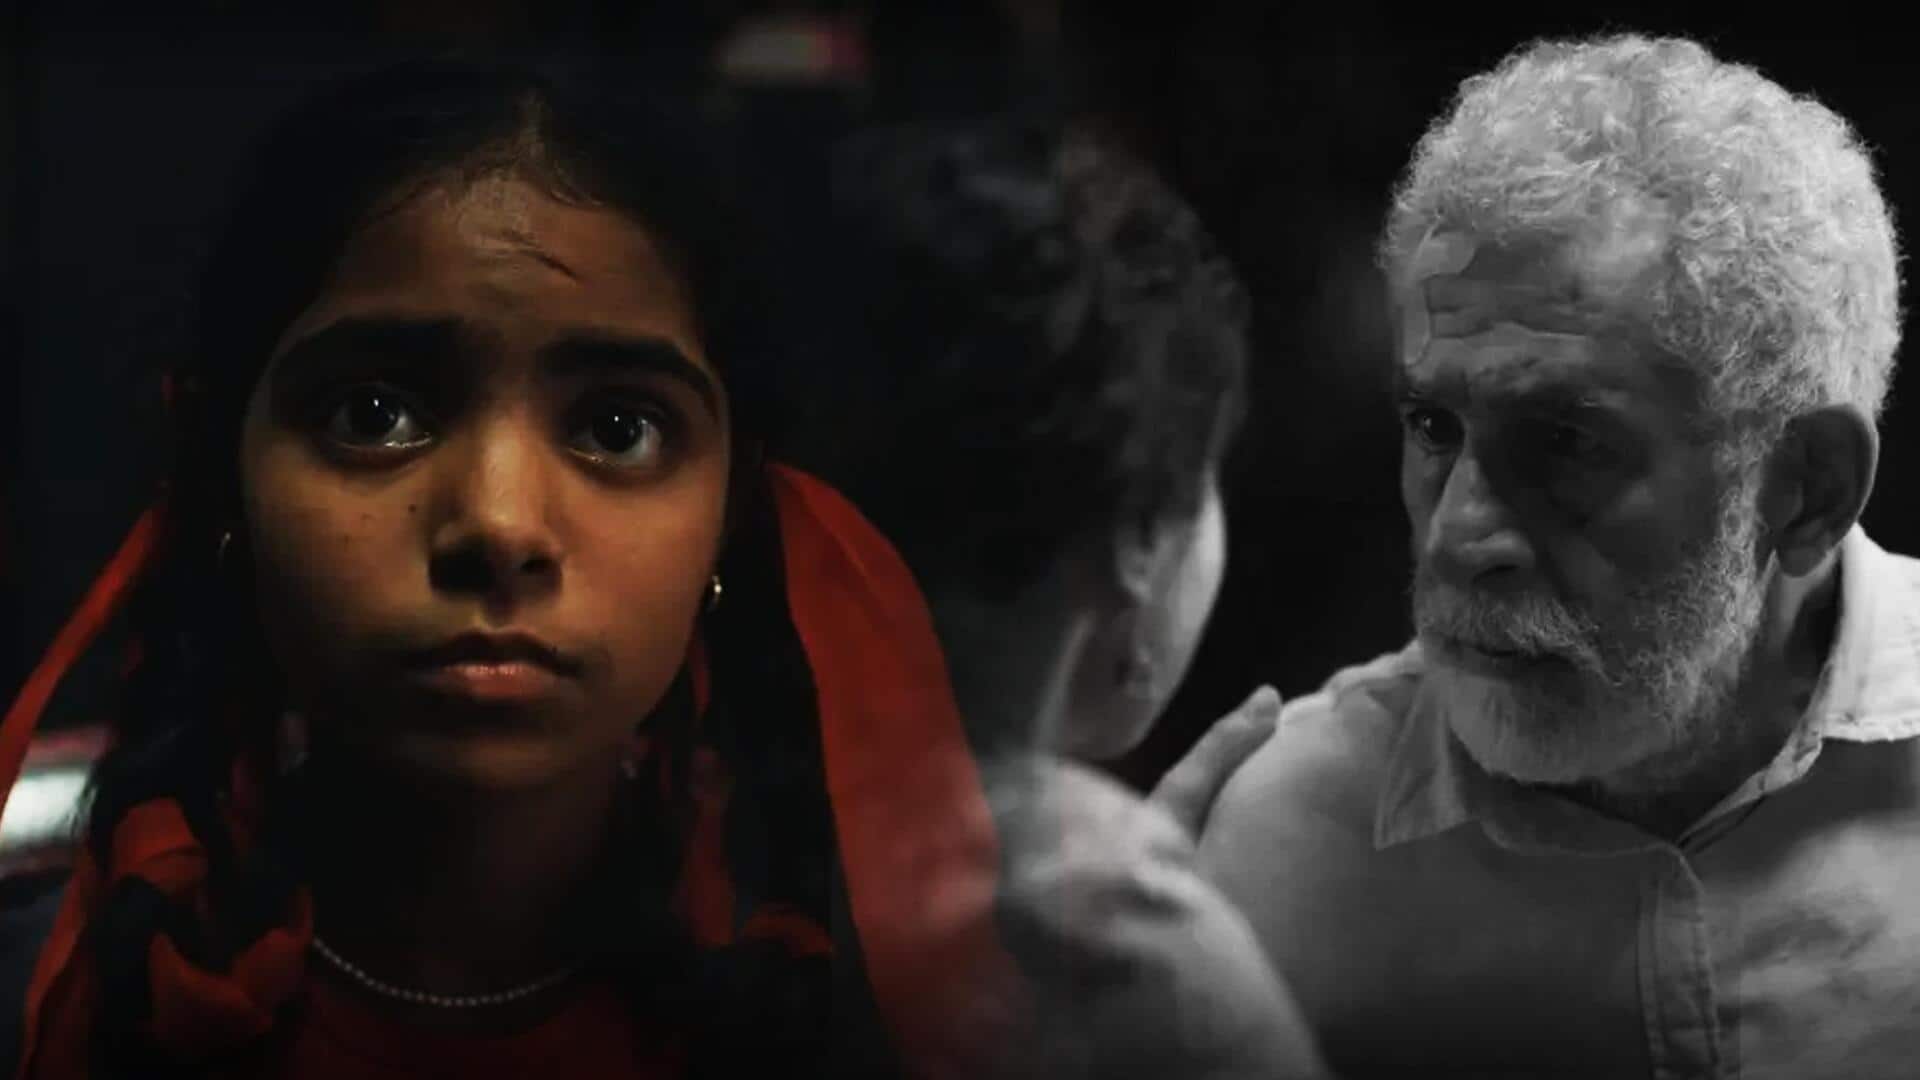 Indian short films in the race for Oscars